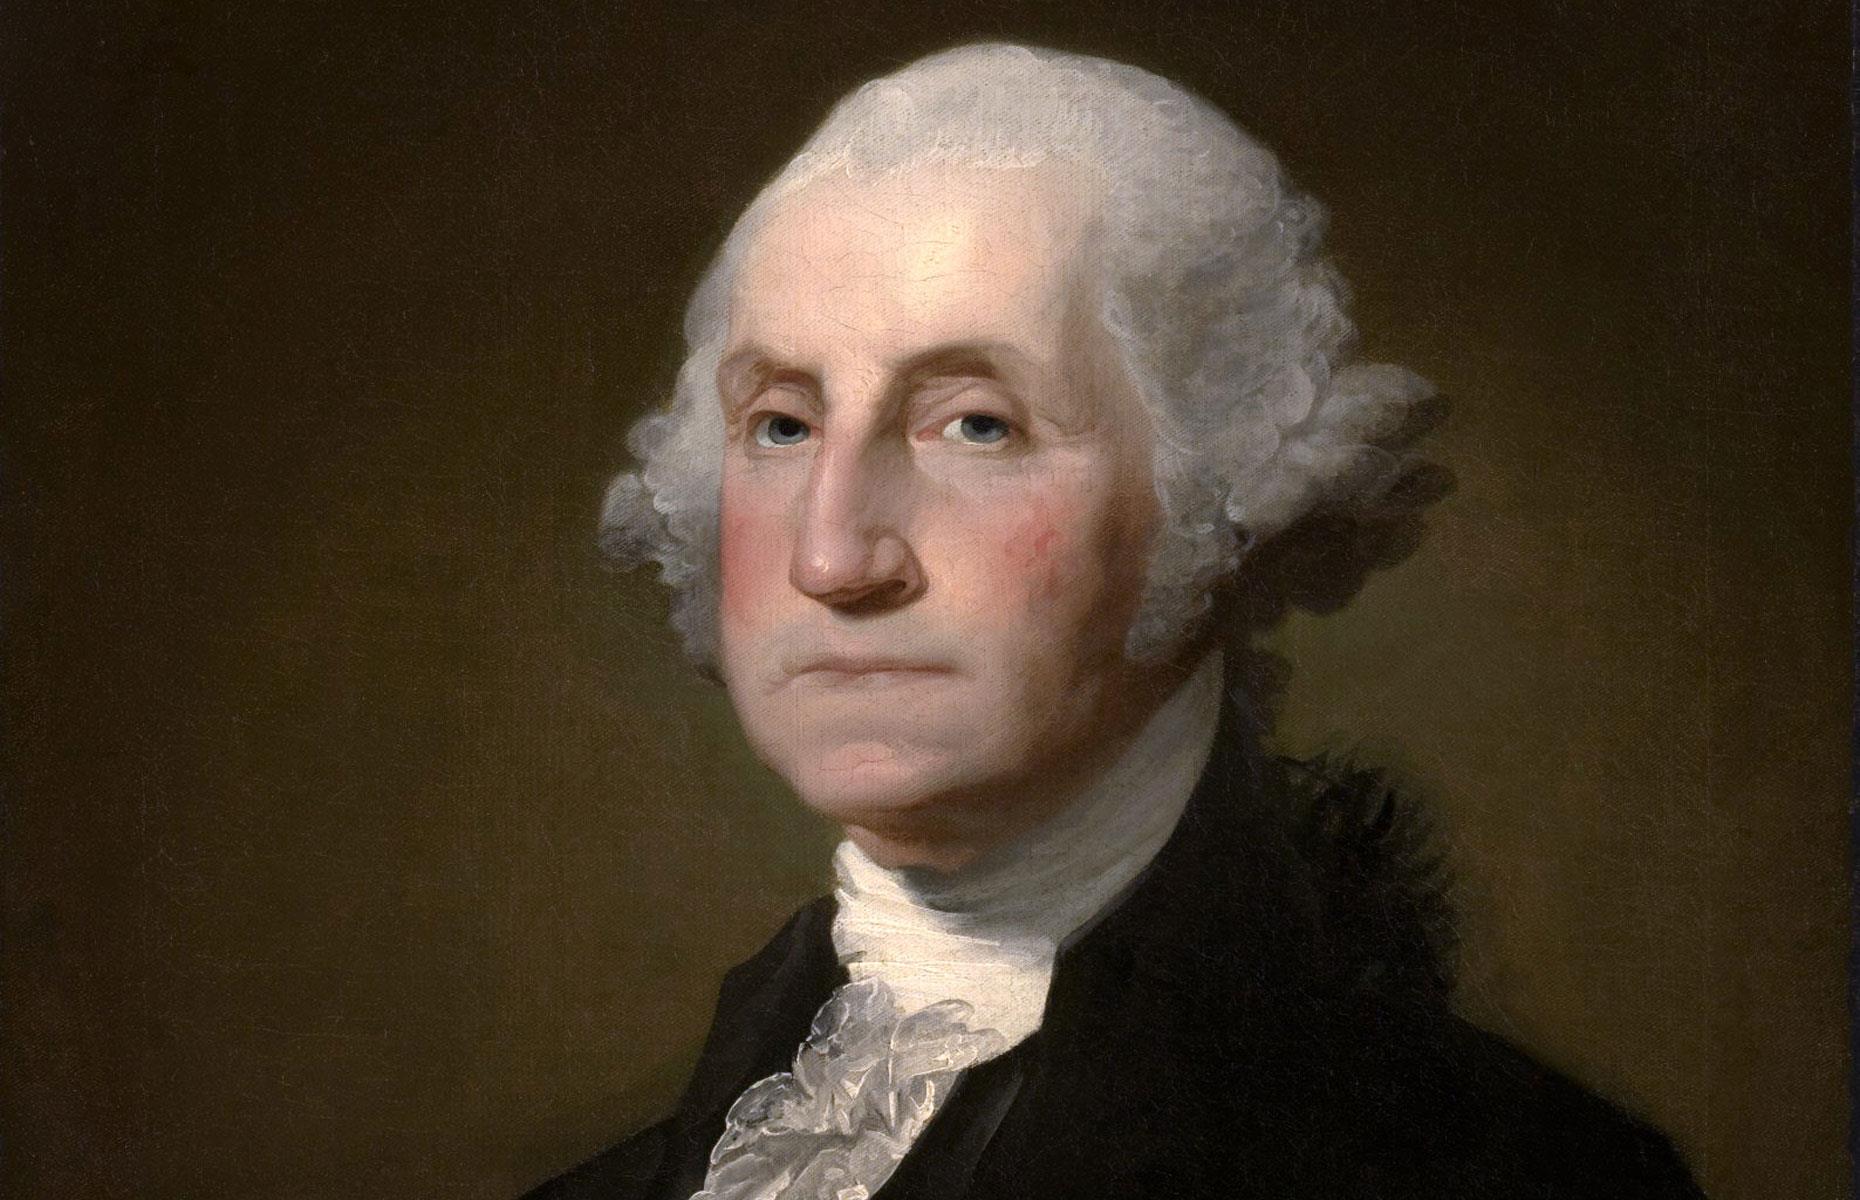 The second wealthiest US president, George Washington owned hundreds of slaves who toiled away on his 8,000-acre Mount Vernon plantation, which contained five farms. The Founding Father was also something of a real estate mogul, owning land from Virginia to New York. Washington's inflation-adjusted peak net worth works out at a hefty $553 million.